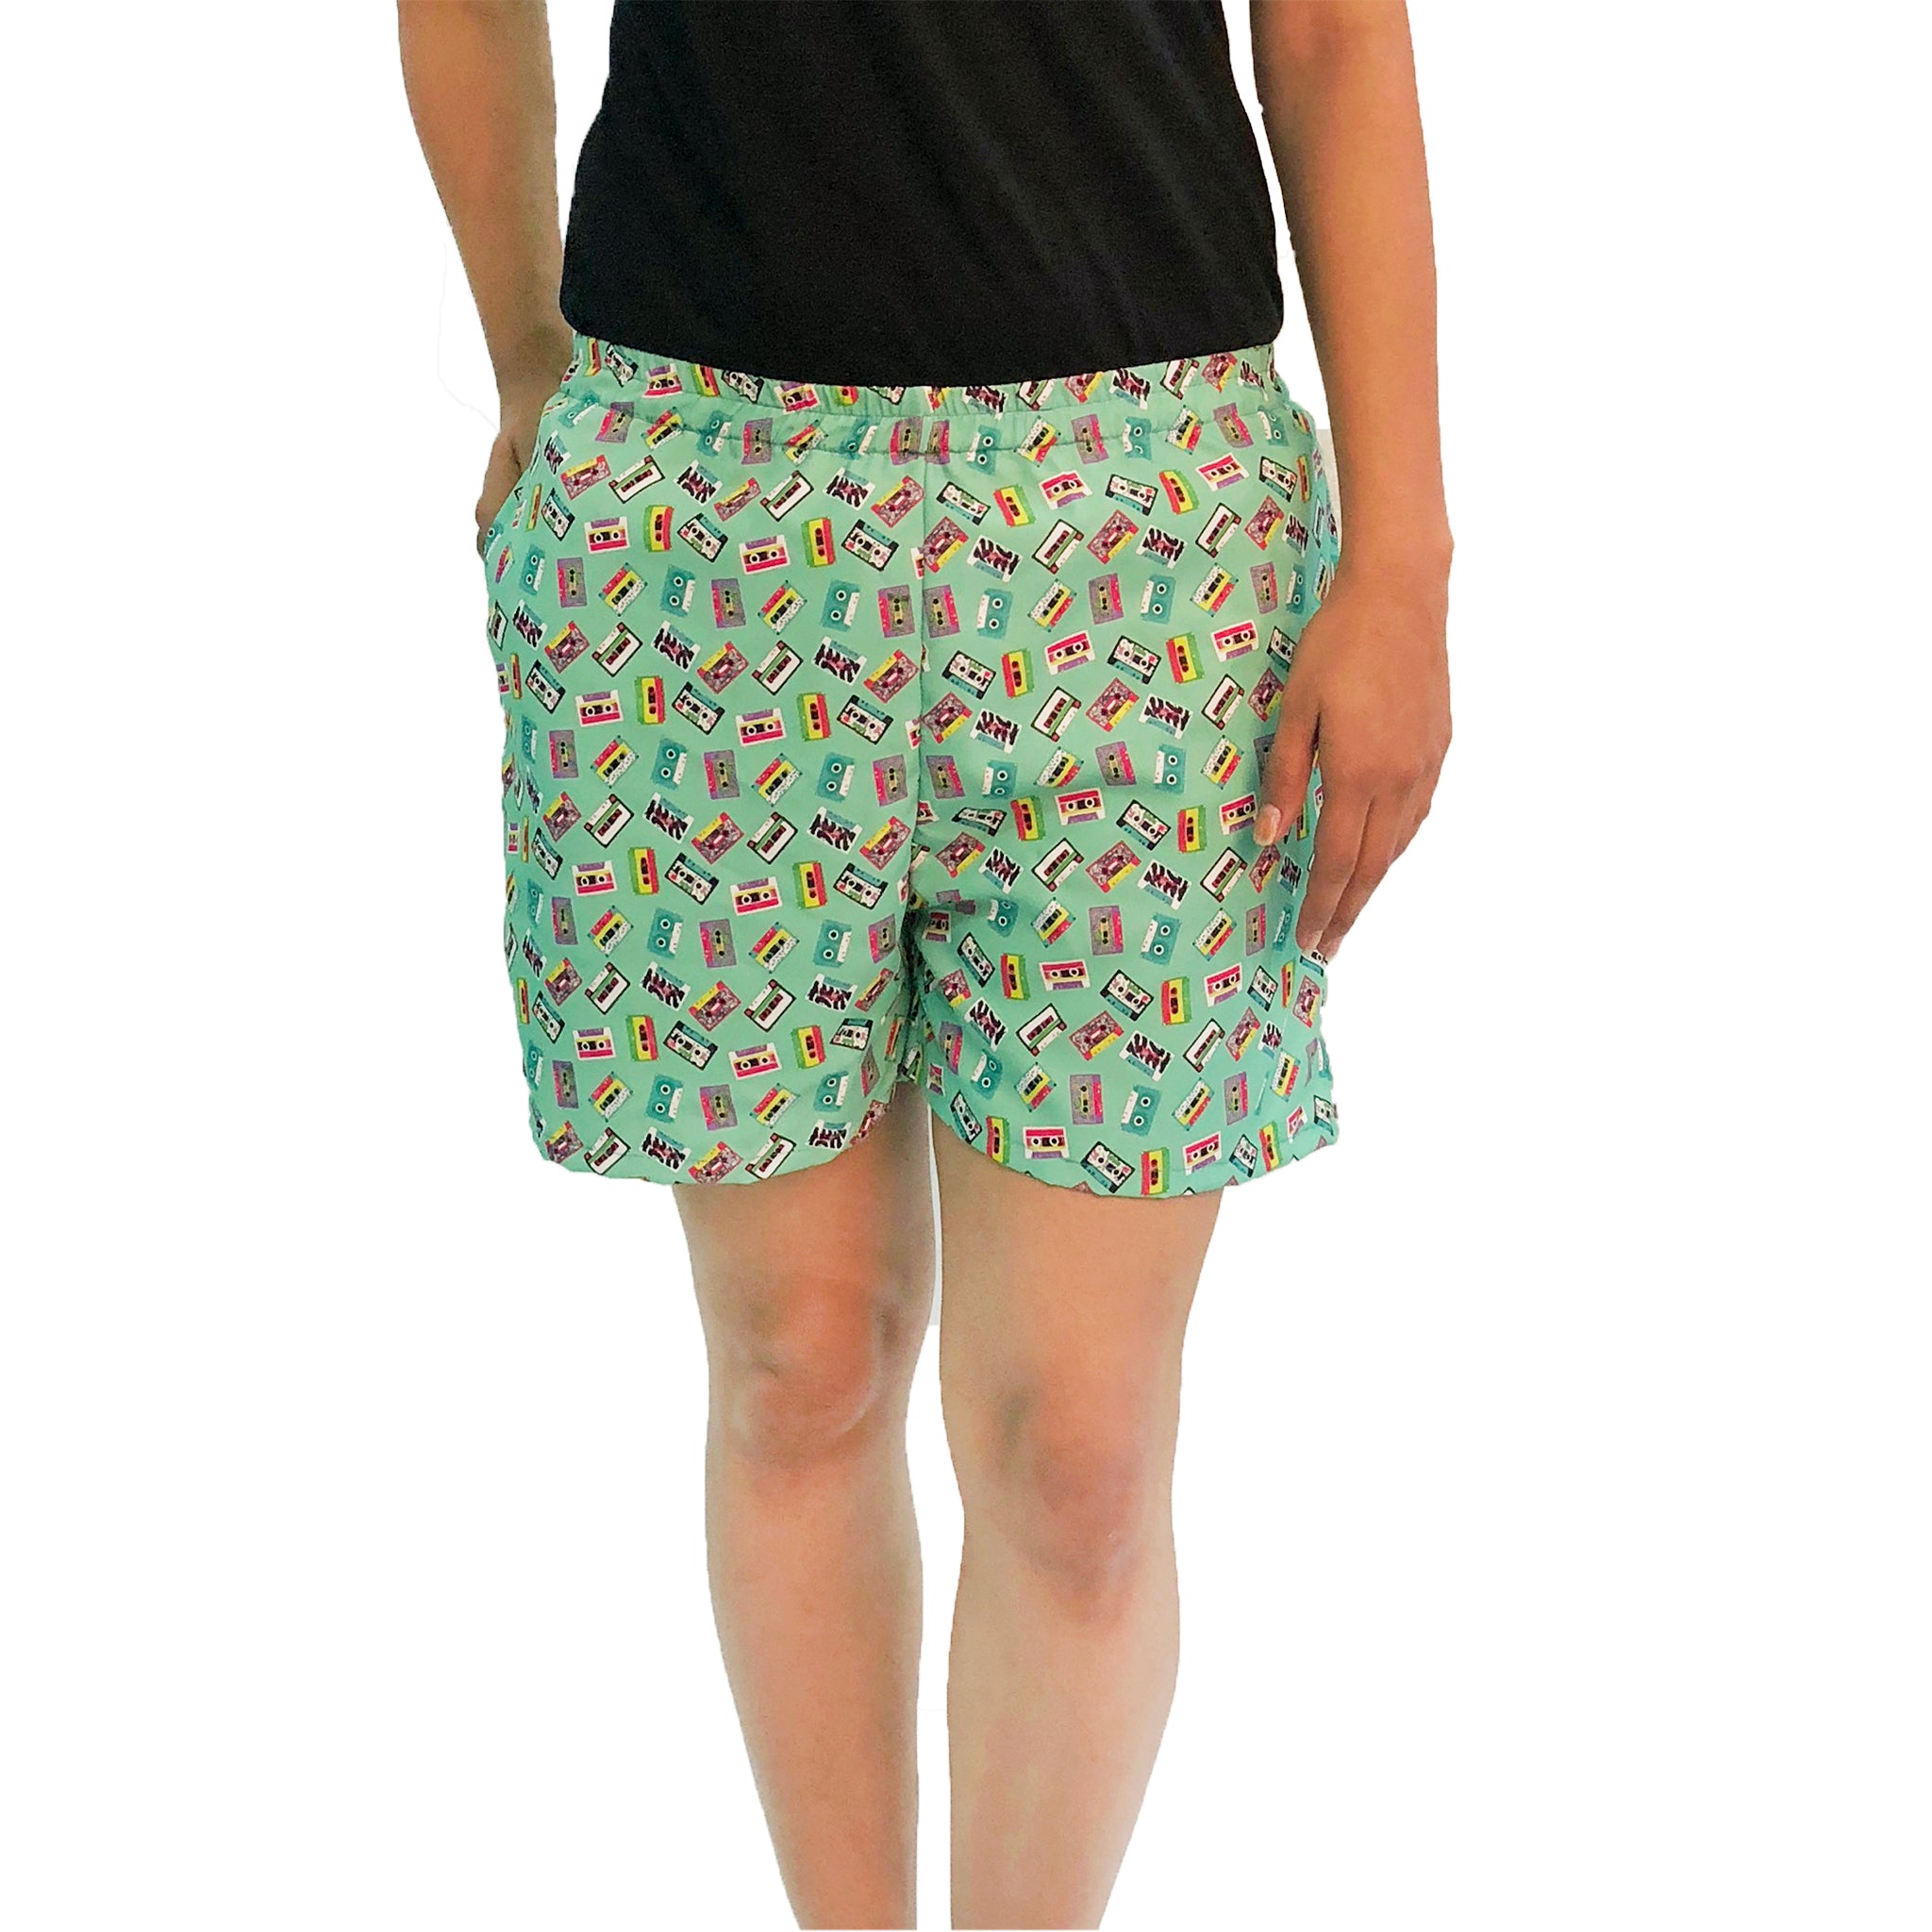 women's-cassette-player-print-shorts-with-pockets-online